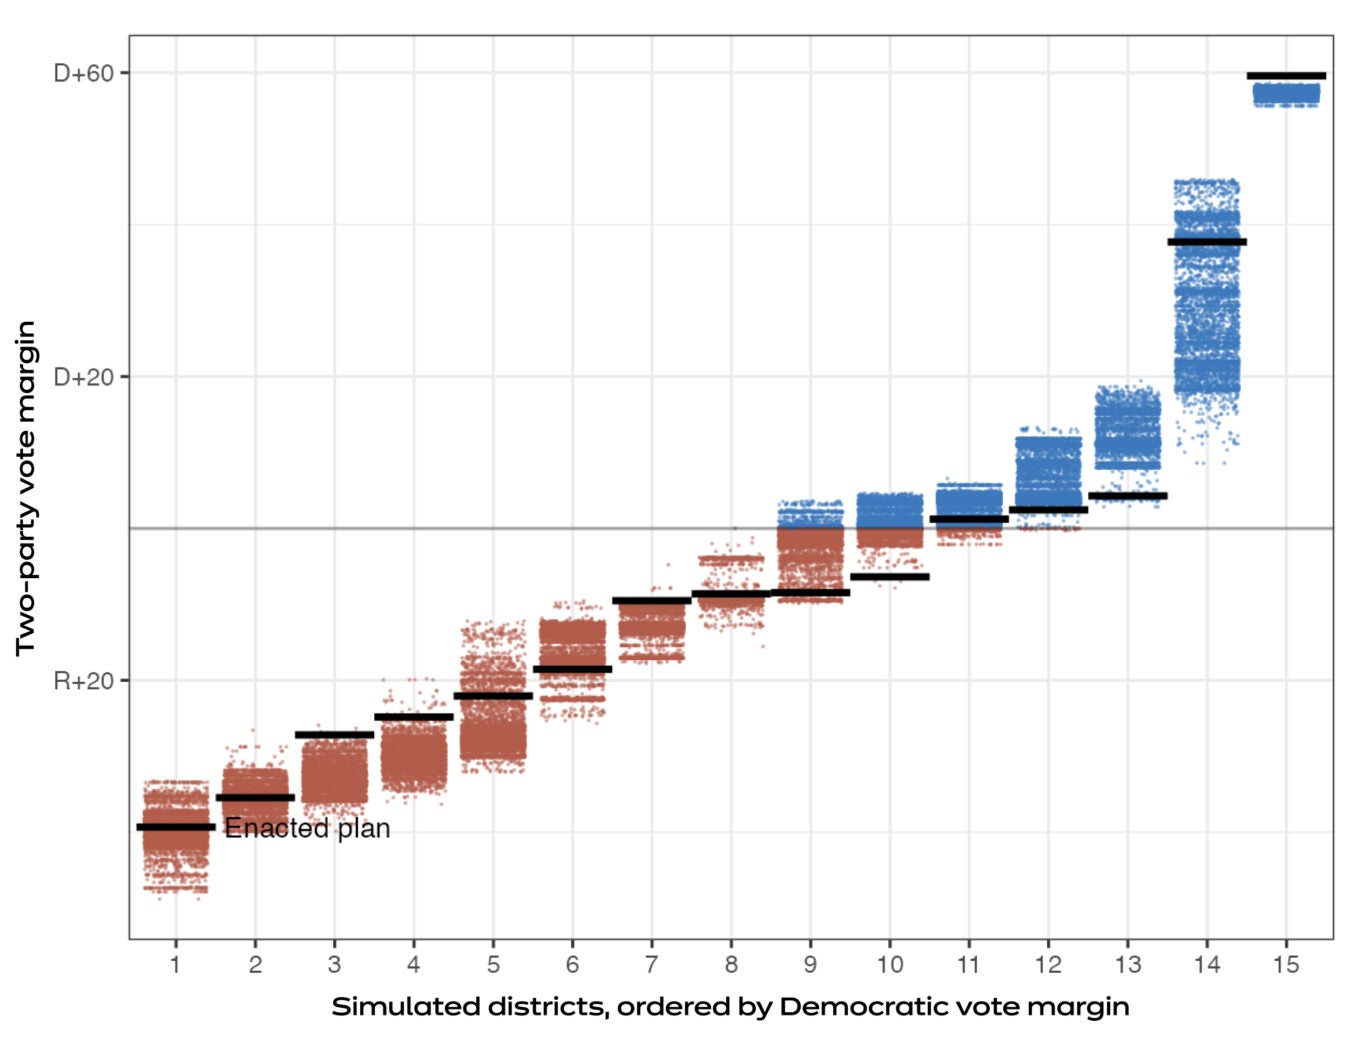 The graph compares the vote margins of each district of the adopted plan to all the simulated districts.